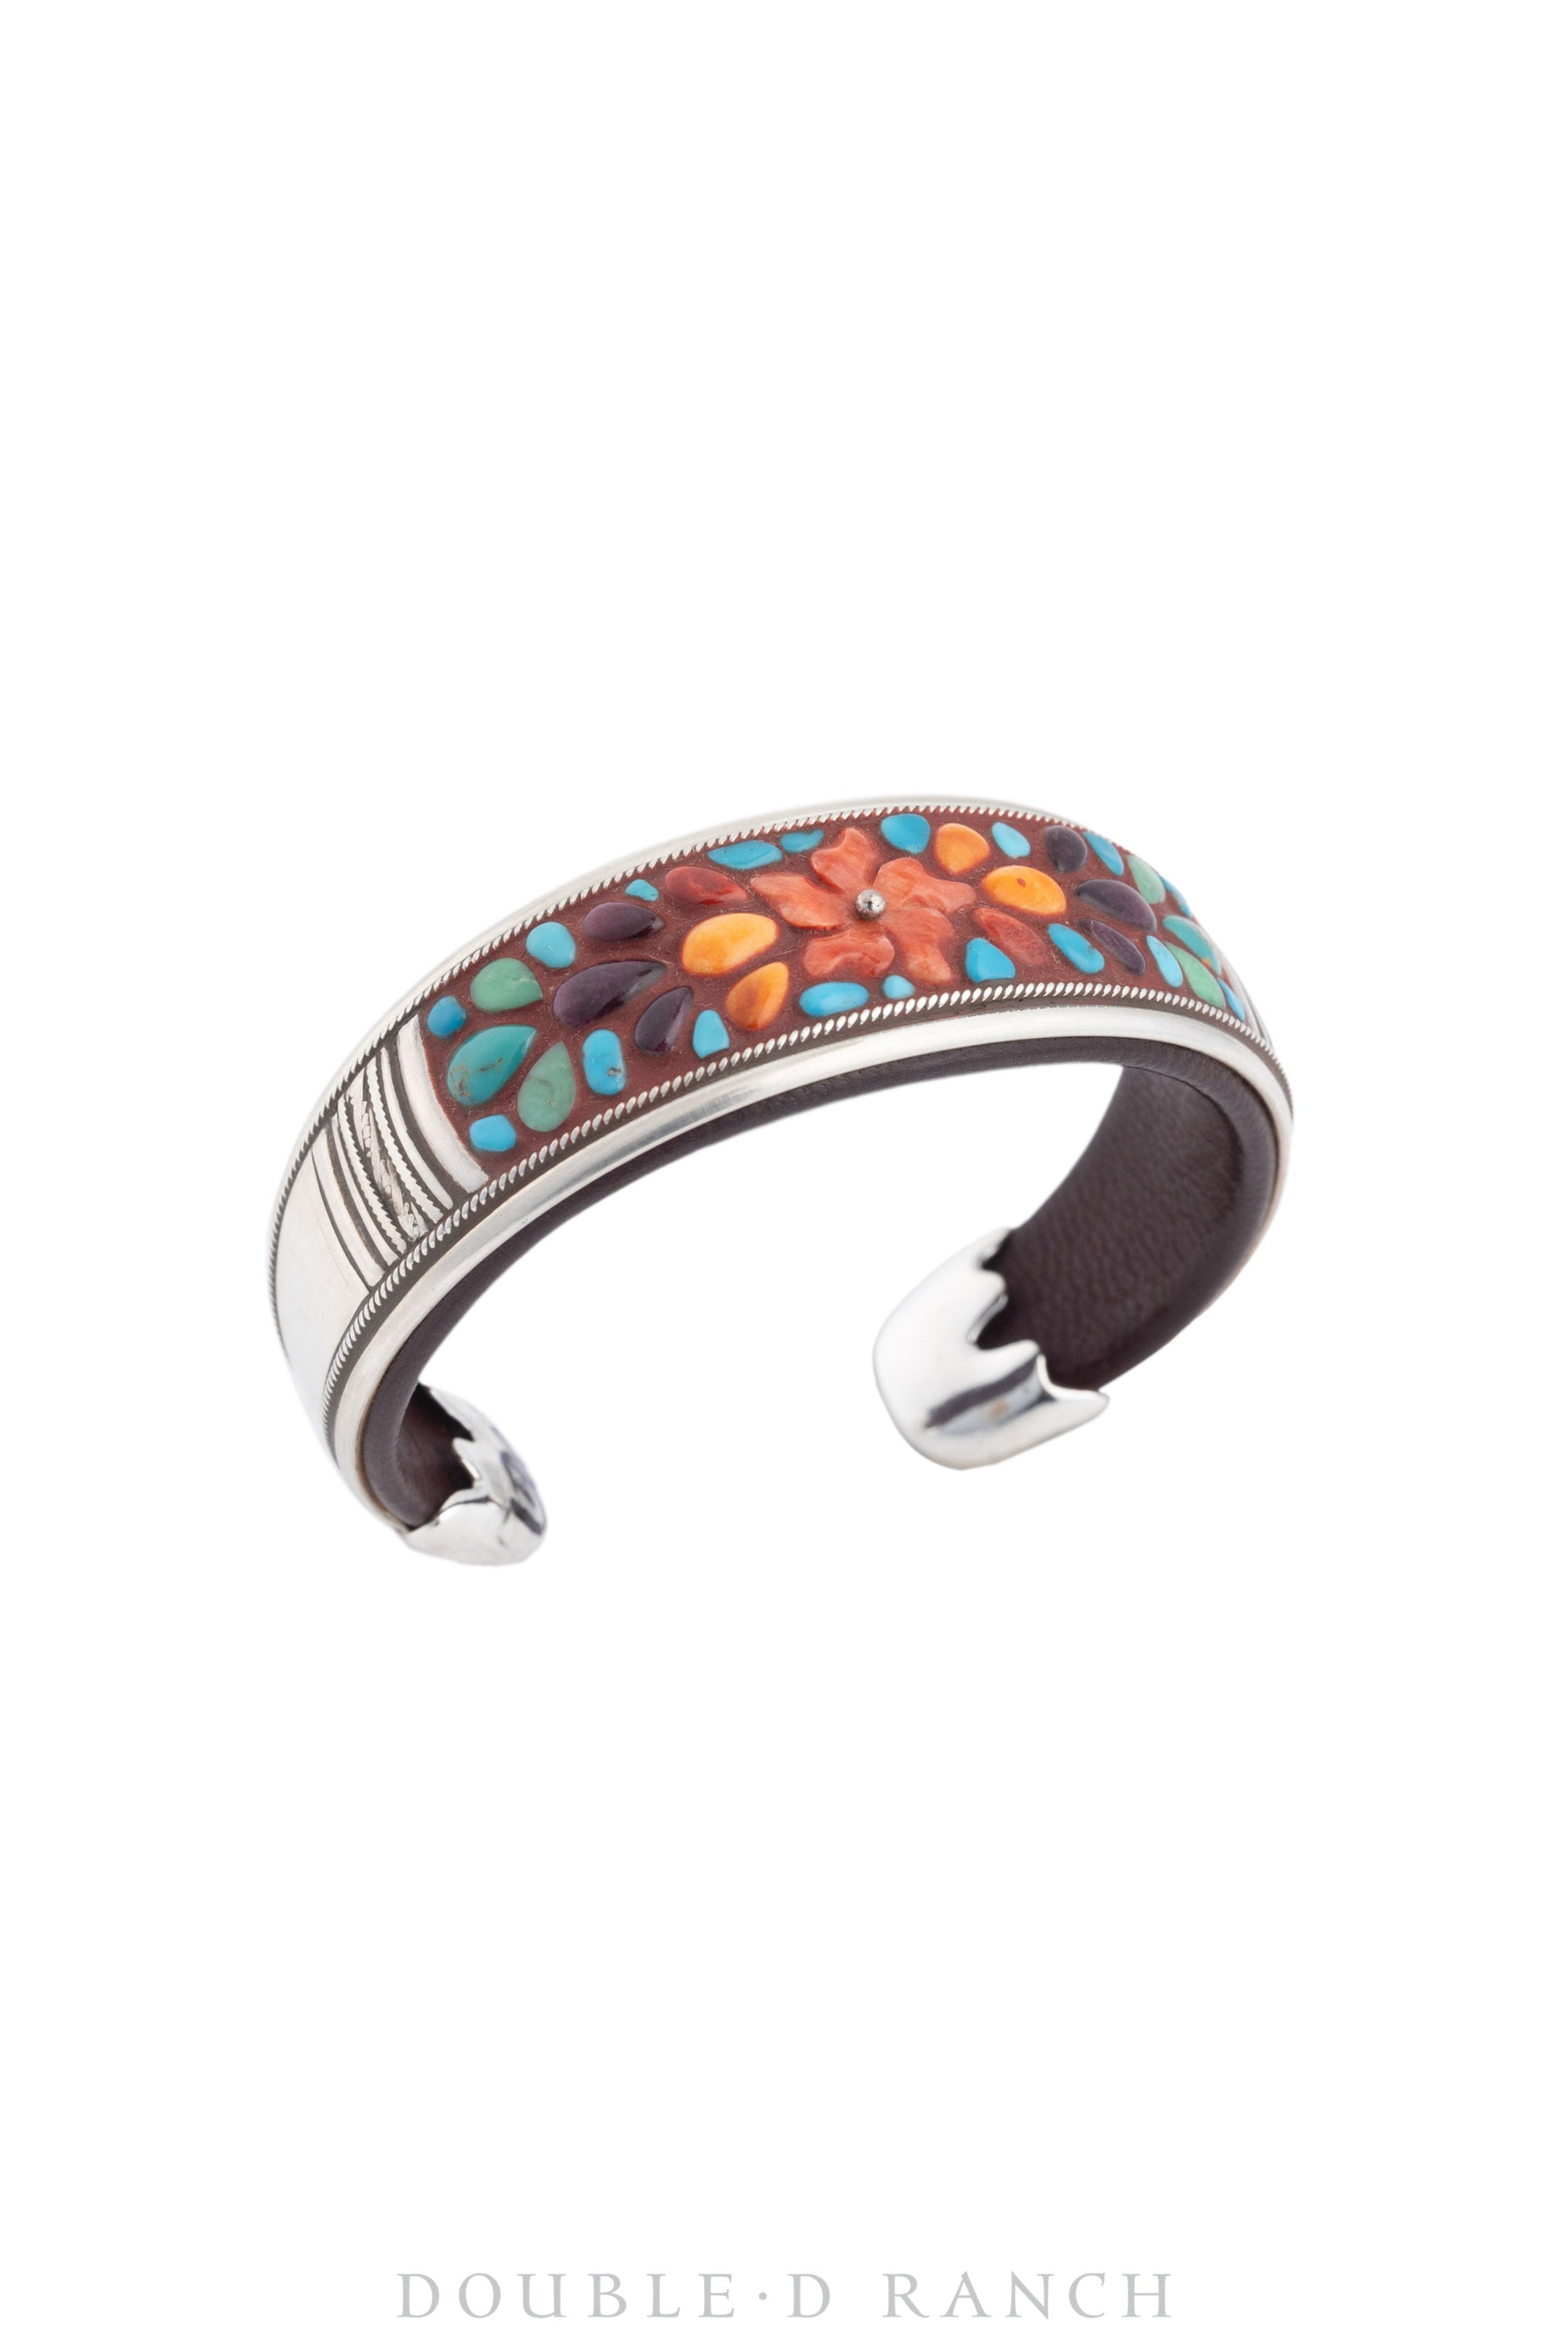 Cuff, Inlay, Mixed Stones, Leather Lined, Artisan, Contemporary, 3580